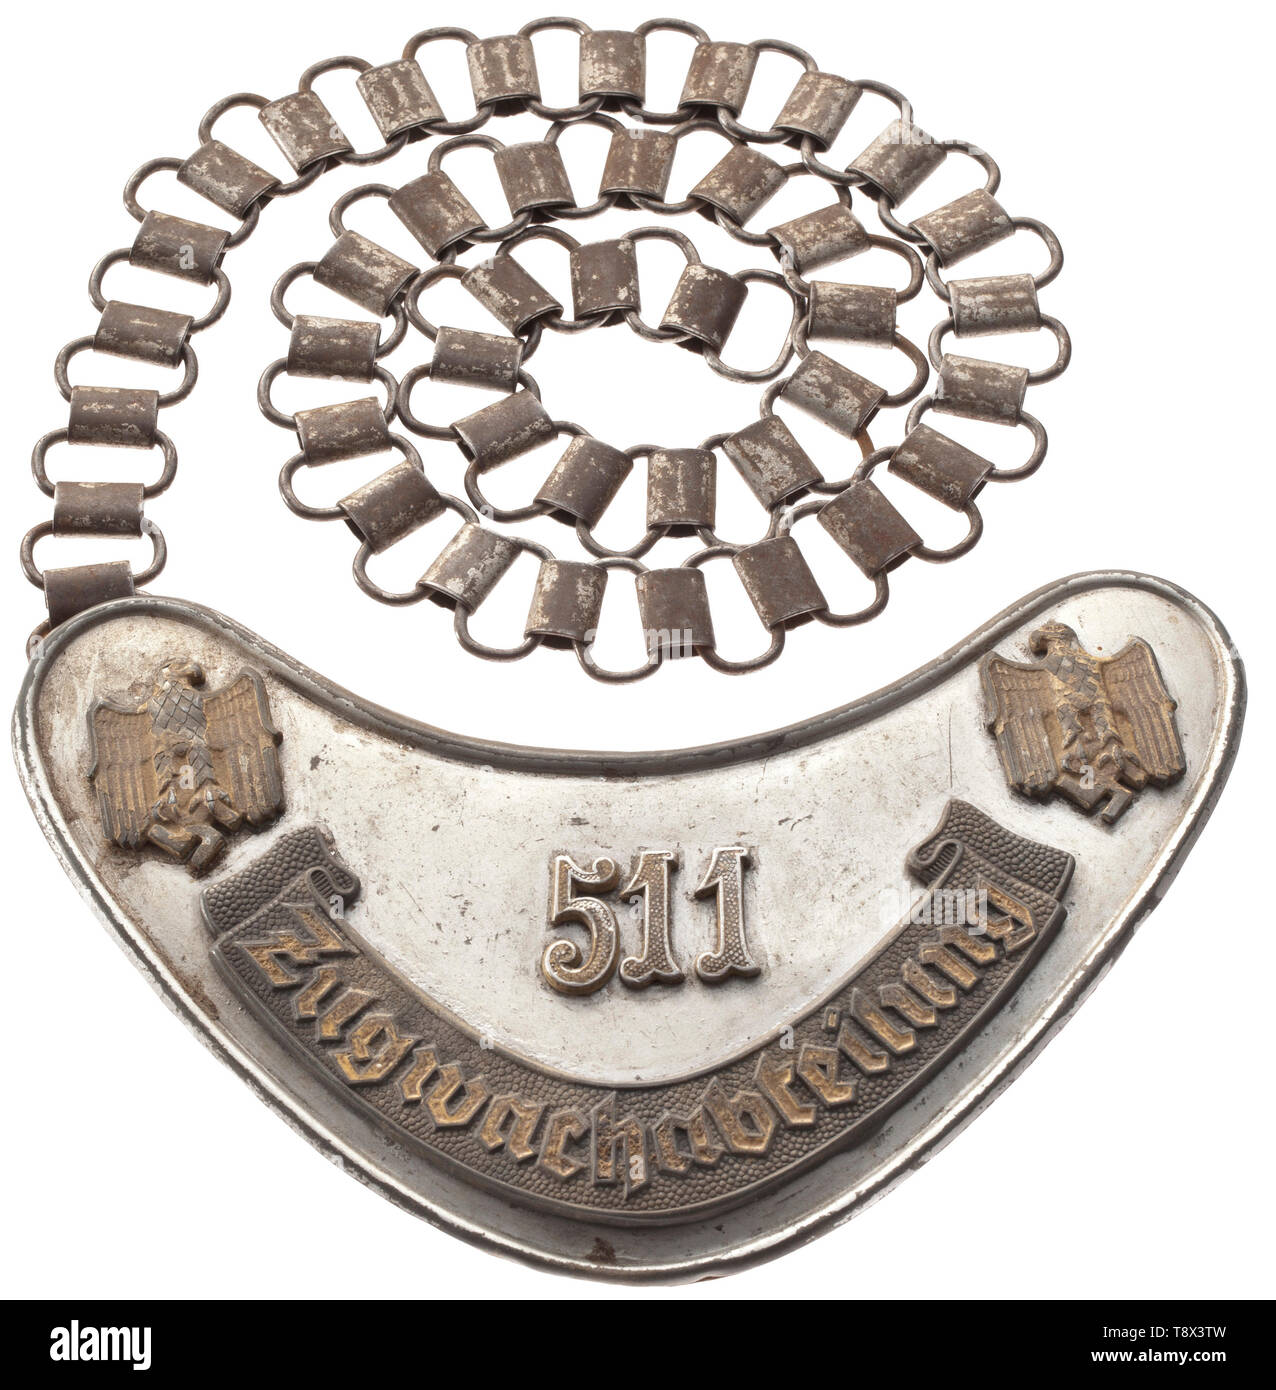 A gorget 'Zugwachabteilung 511' of the Wehrmacht service badge from 1942 Silver-coloured painted shield with applied grey bandeau 'Zugwachabteilung', with this inscription as well as both national eagles at the corners and the number '511' all highlighted in luminescent paint. Pressed paper liner, iron clasps and chain for wear. The train security guards were established by the beginning of the war as ancillary organisational units due to the heightened military traffic volumes. These small units were, like those of the military police, broadly autonomous and answerable to , Editorial-Use-Only Stock Photo